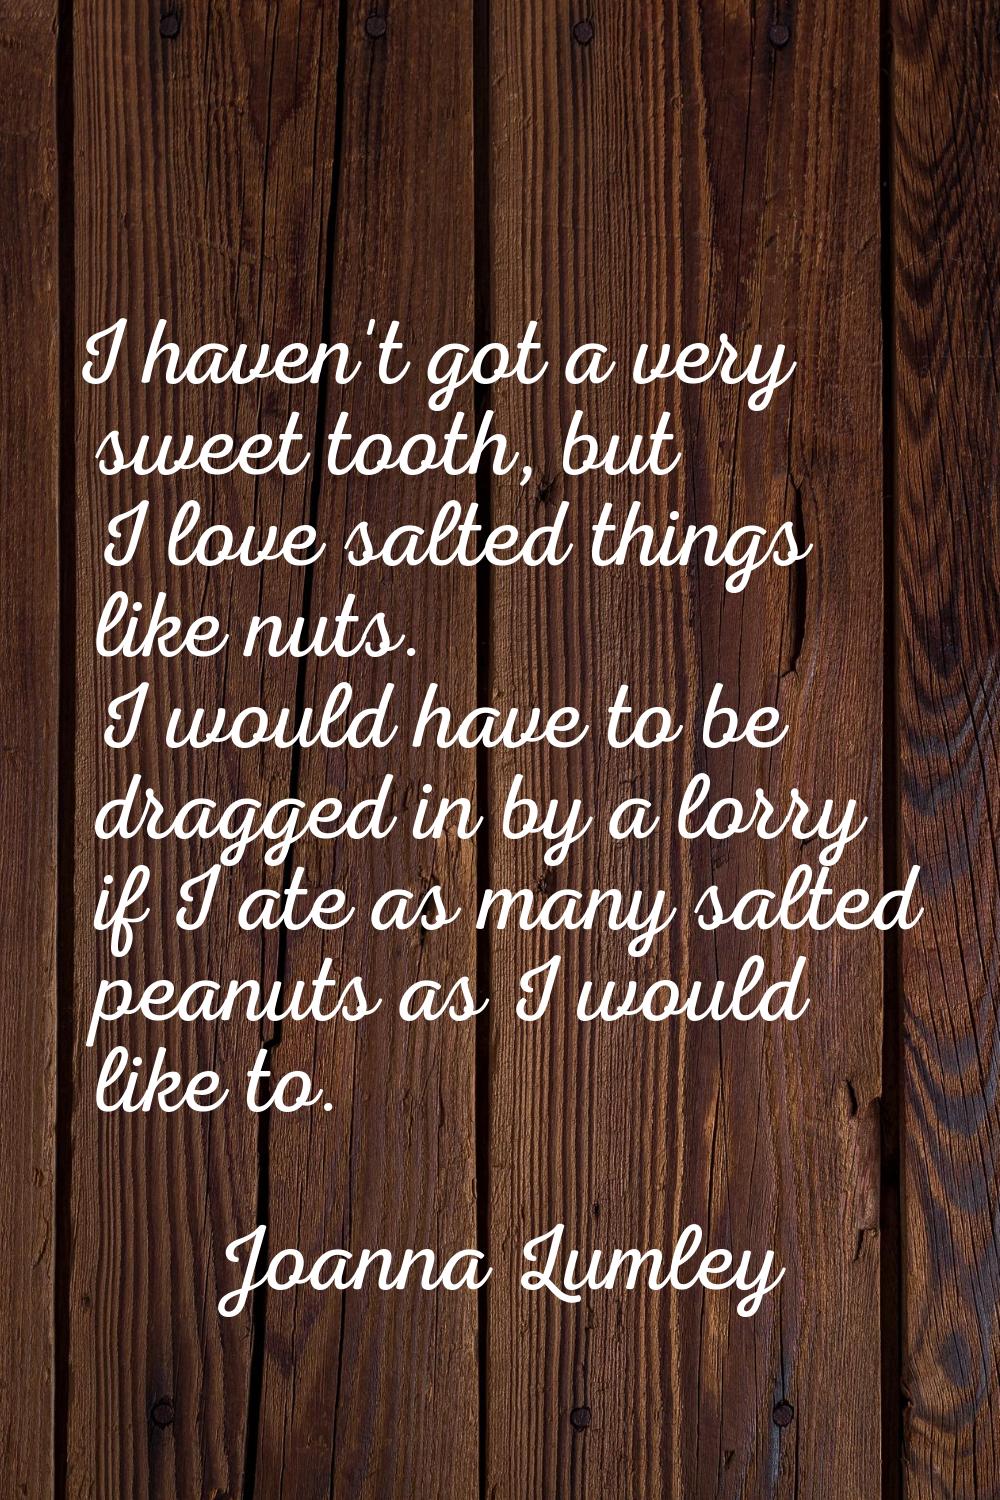 I haven't got a very sweet tooth, but I love salted things like nuts. I would have to be dragged in